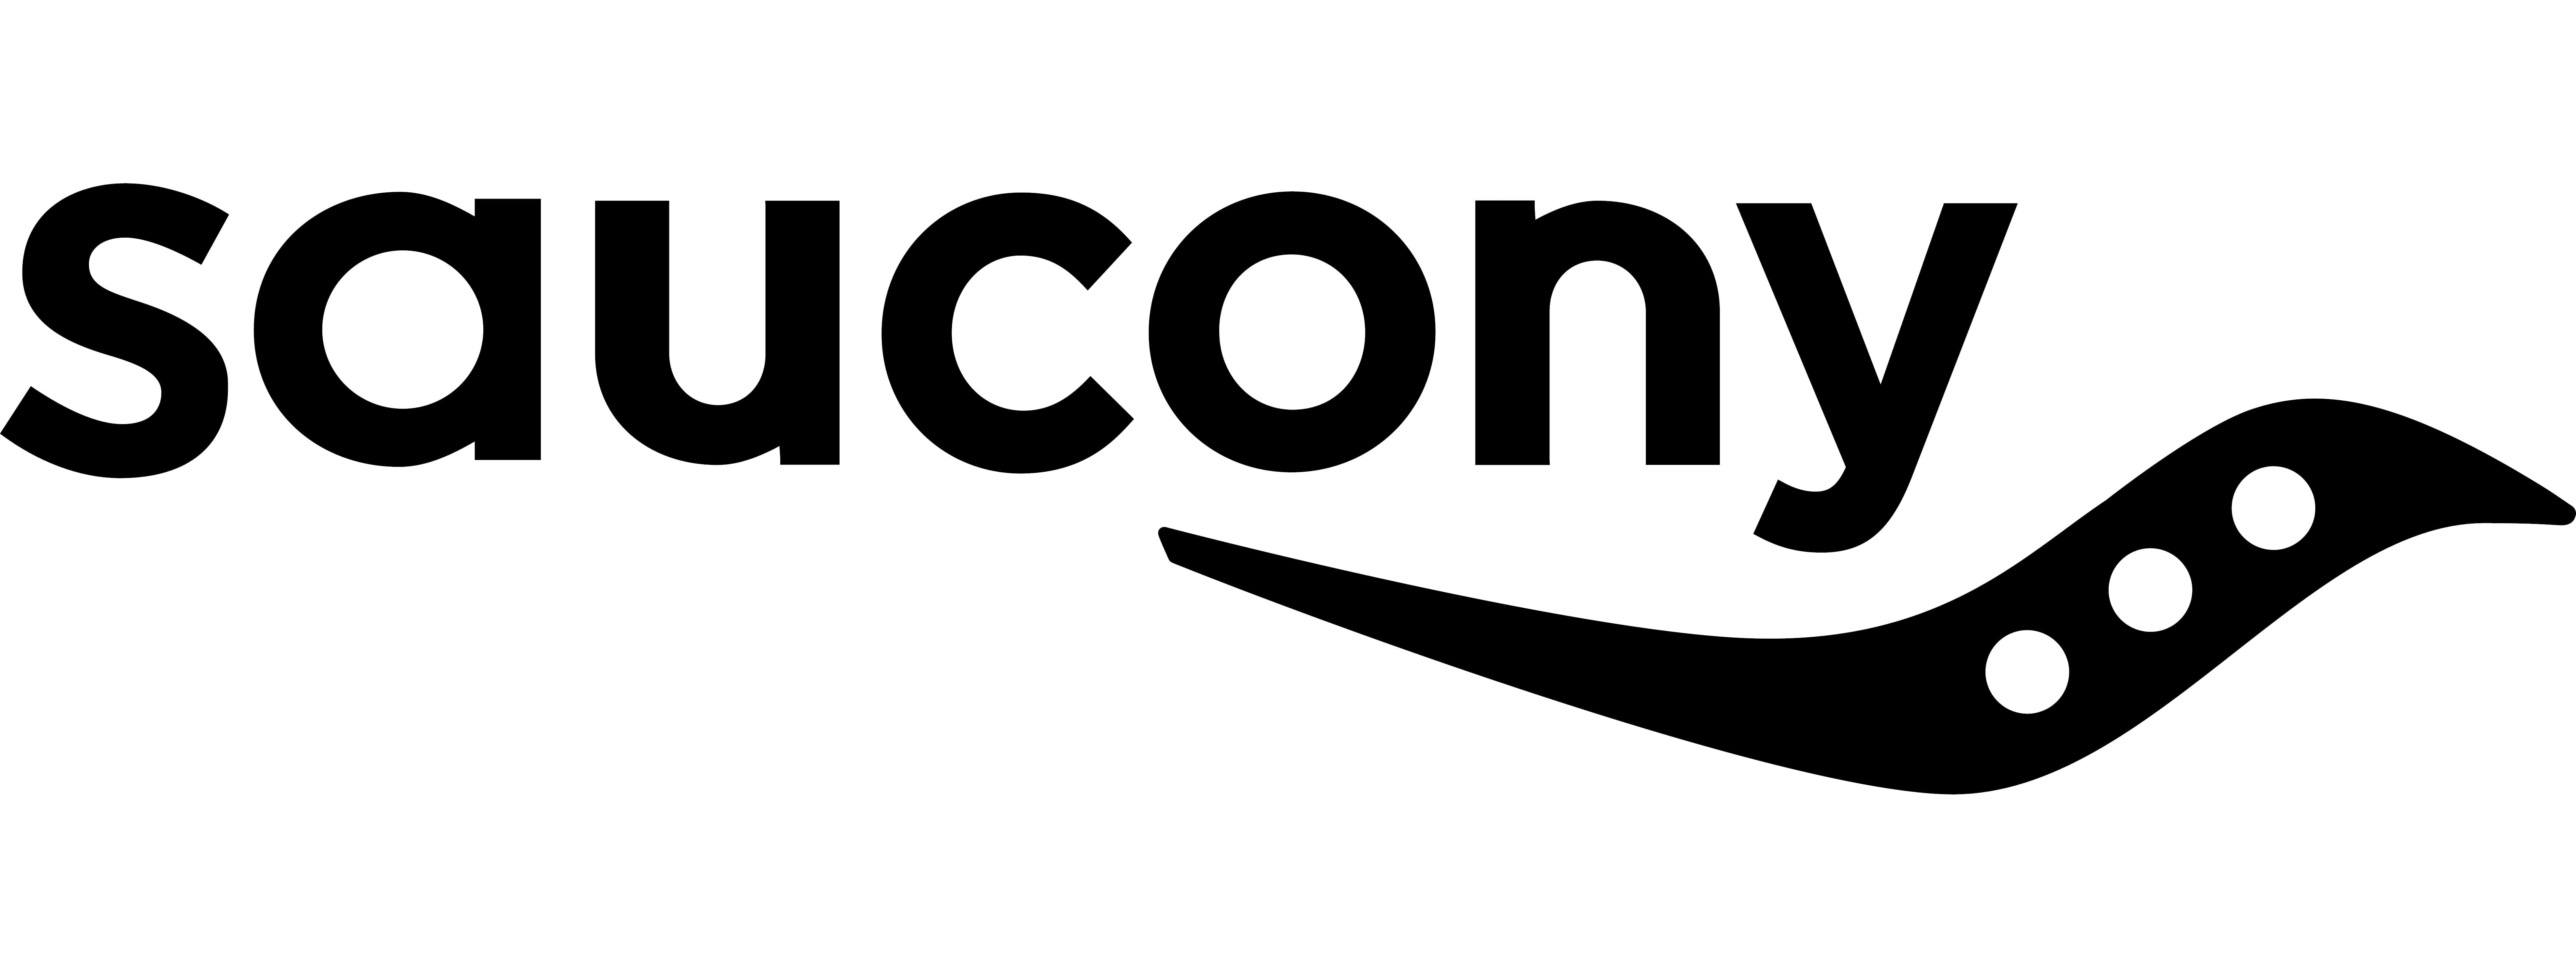 What is the Symbol Mesn on Sauconys?